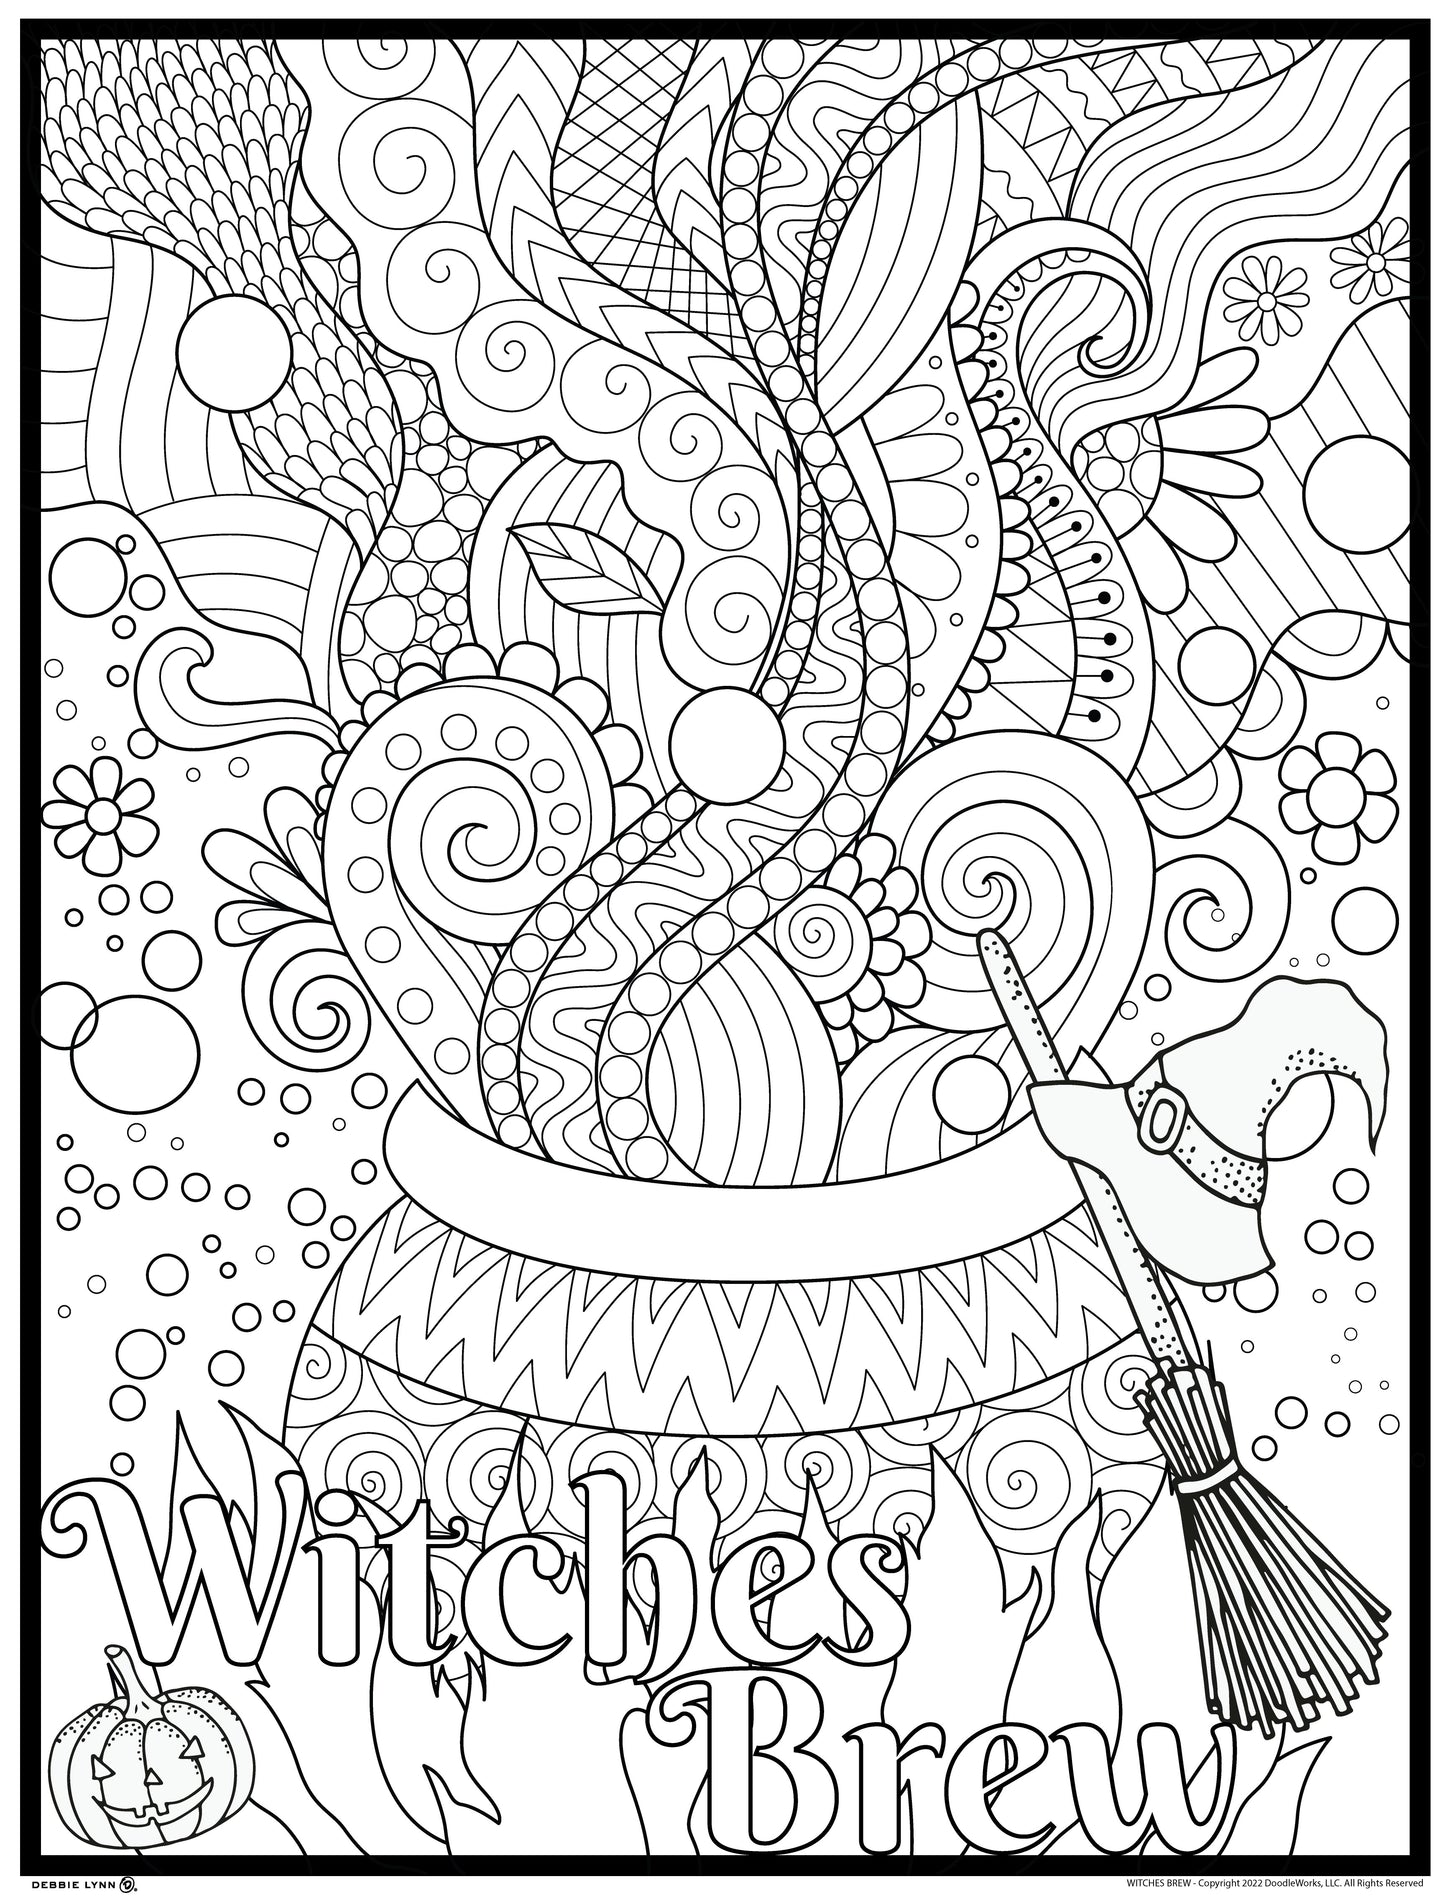 Witches Brew Personalized Giant Coloring Poster 46"x60"